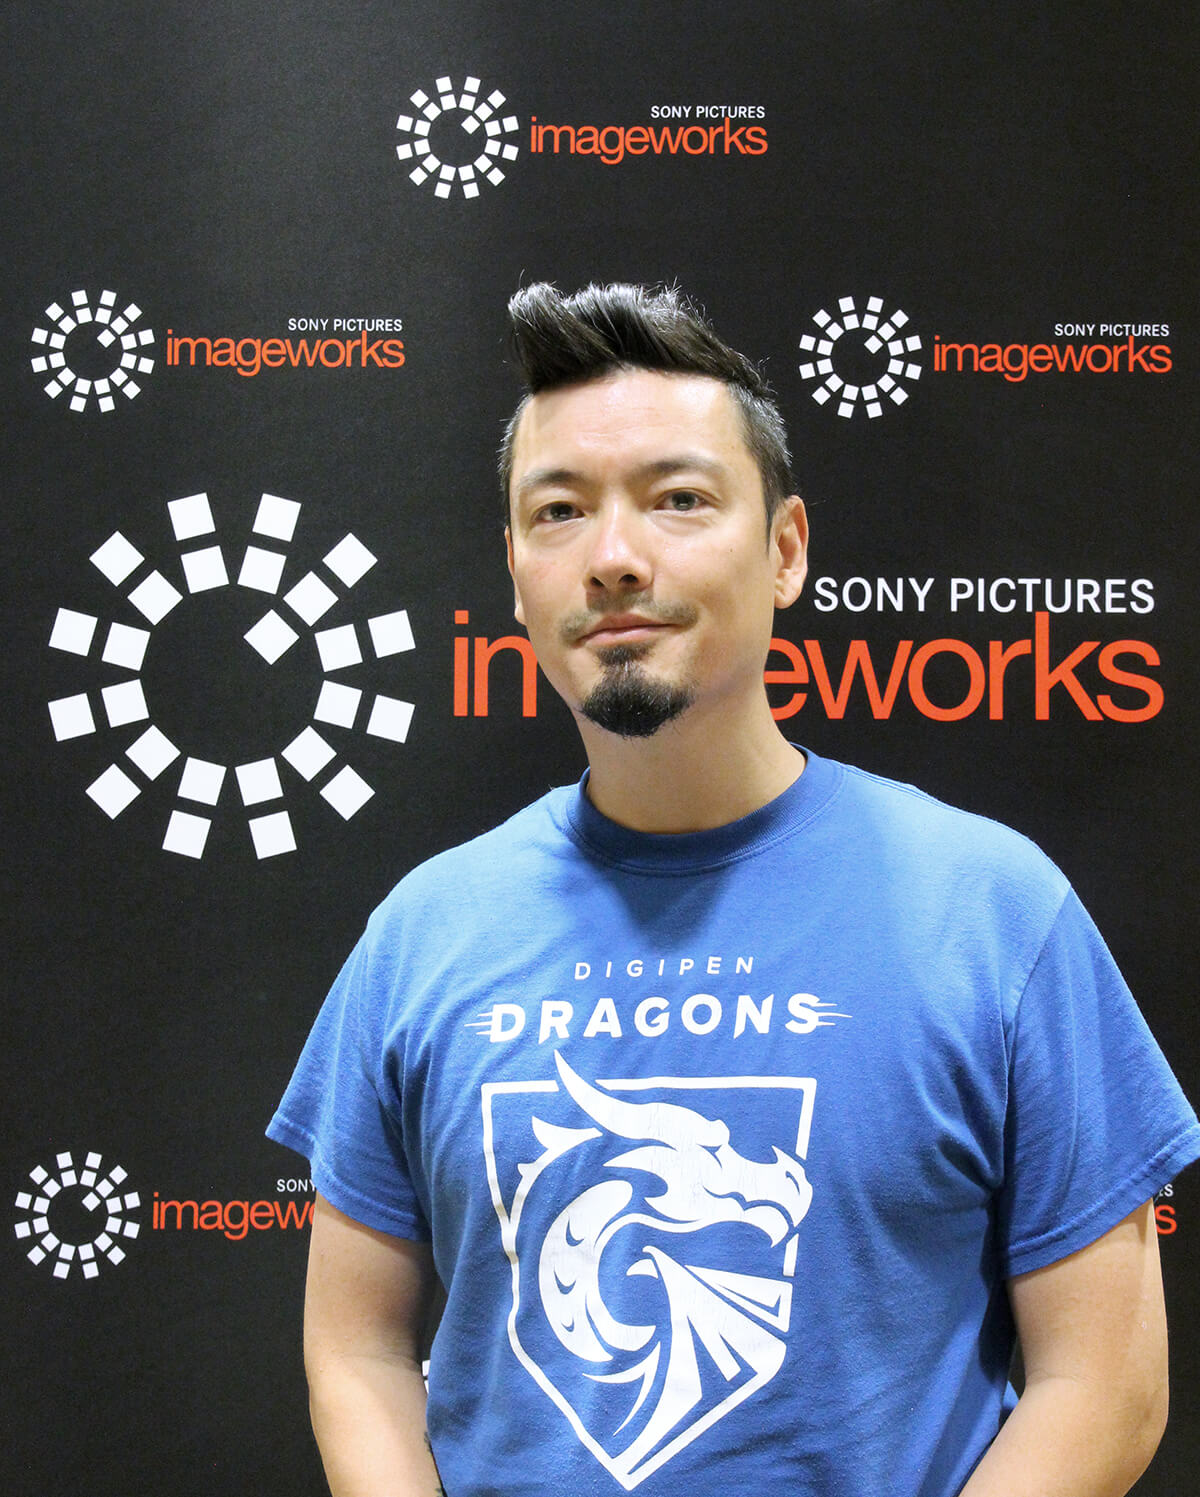 Animation alumnus Nick Kondo poses in a DigiPen Dragons t-shirt in front of the Sony Pictures Imageworks logo